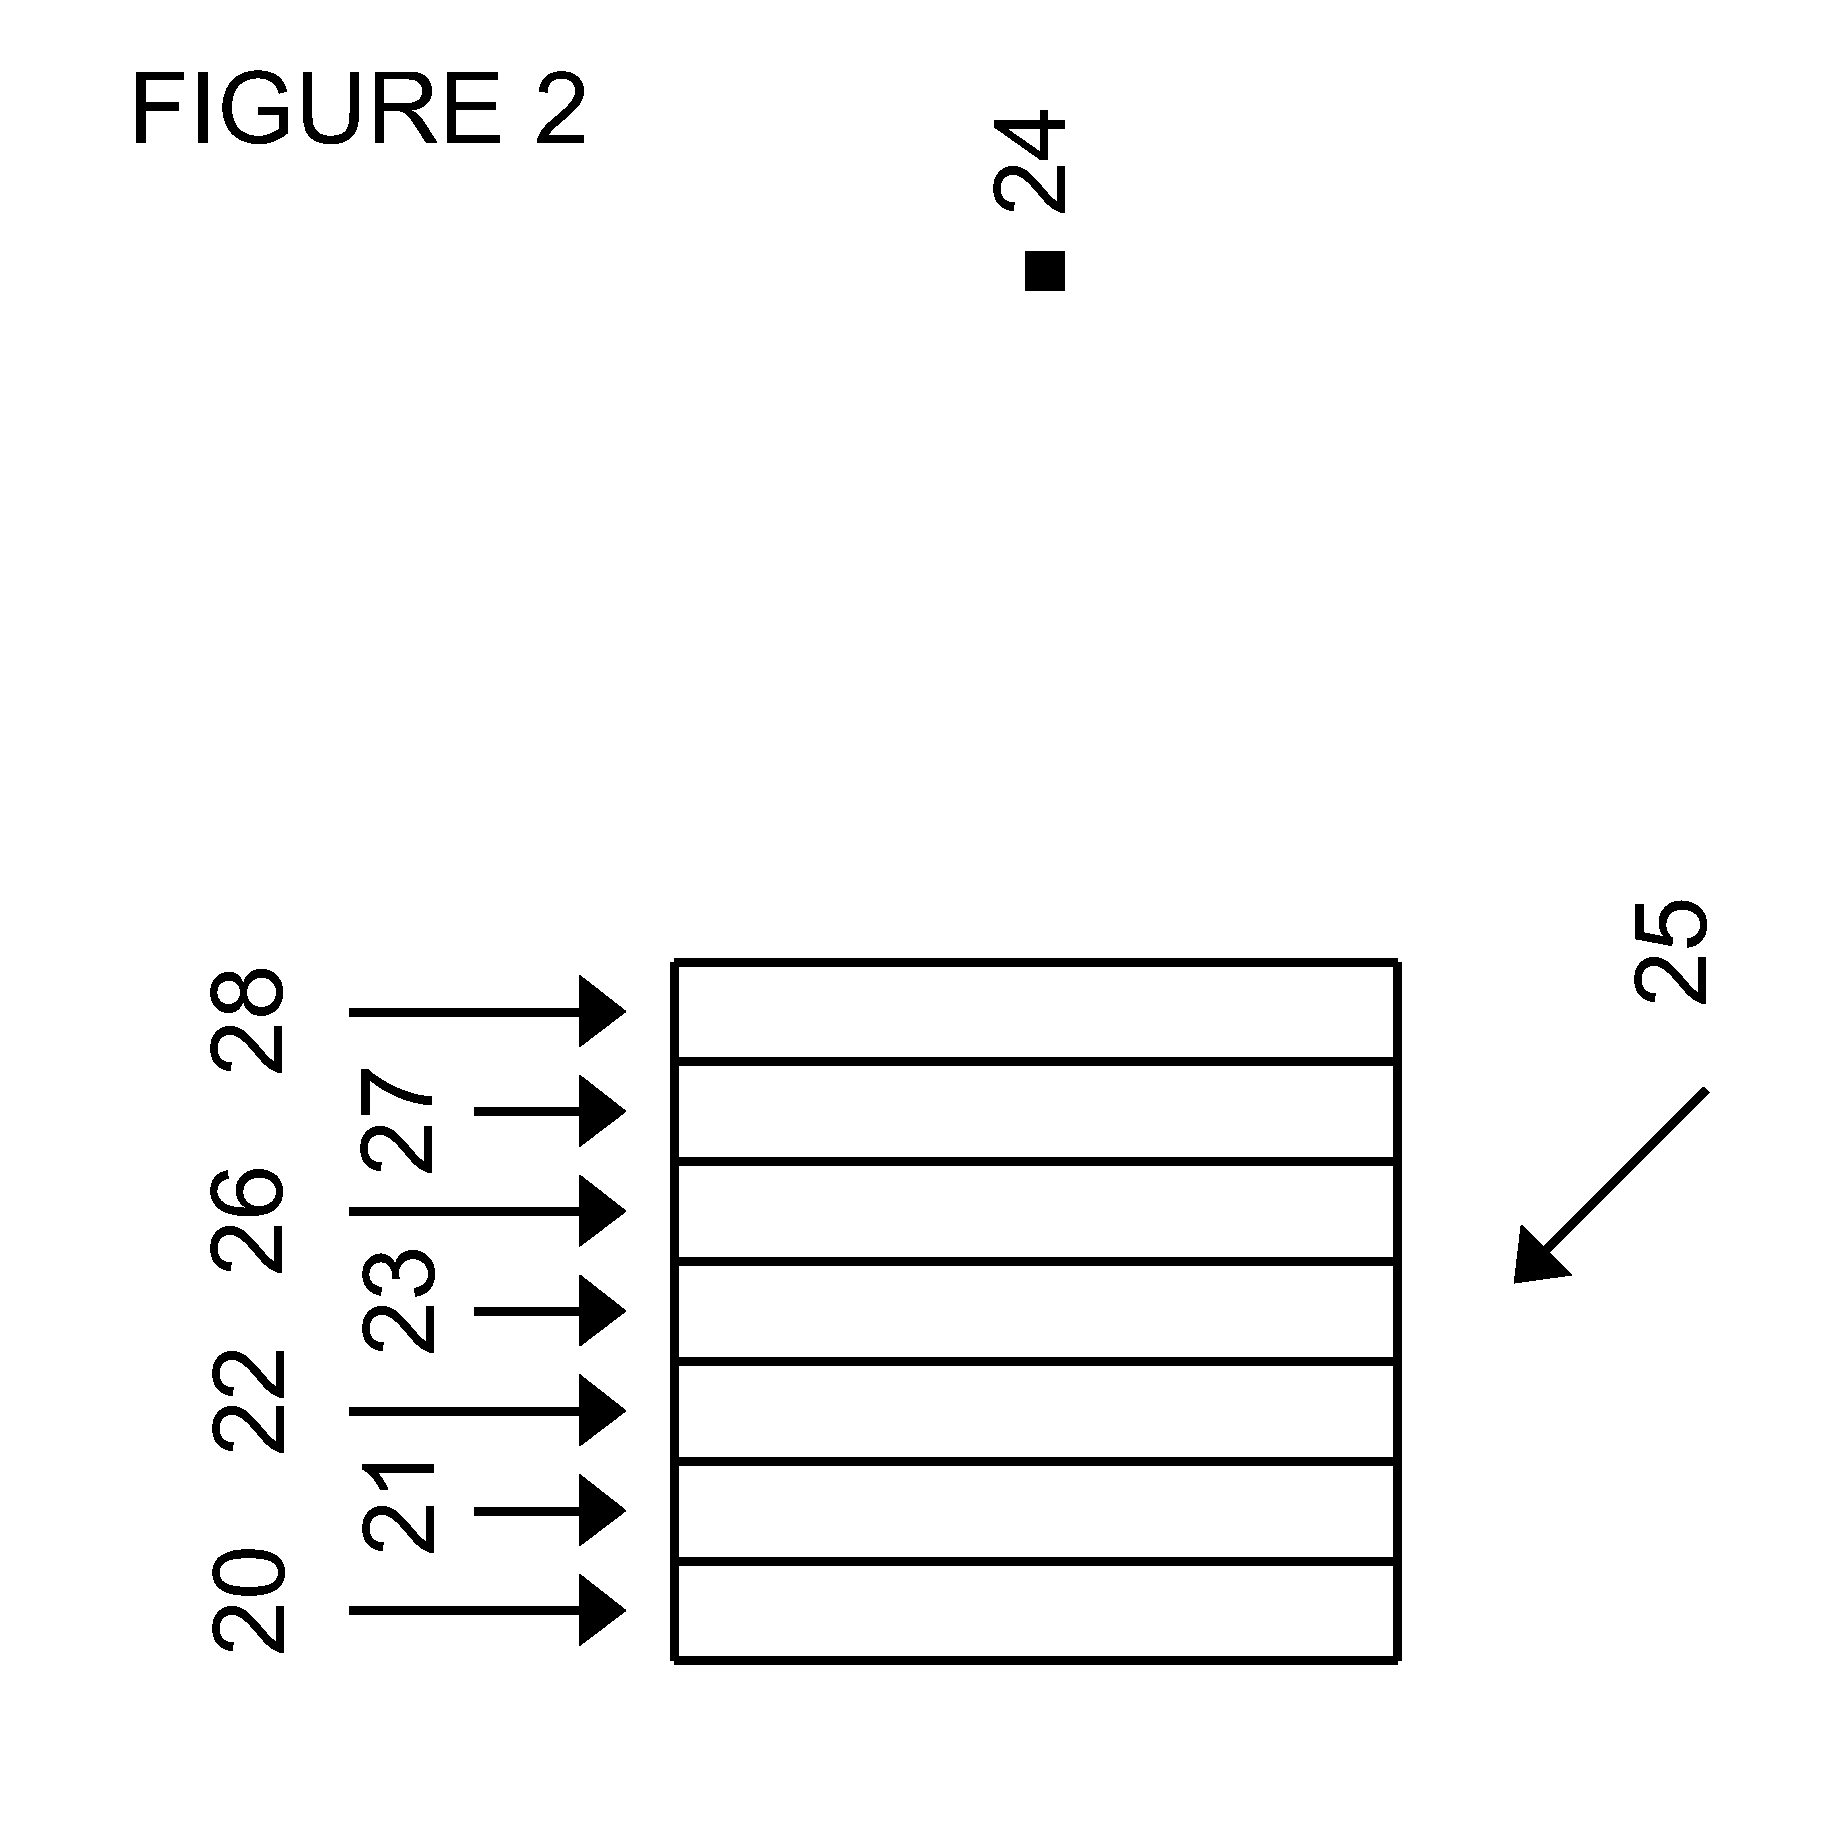 Holographic display device